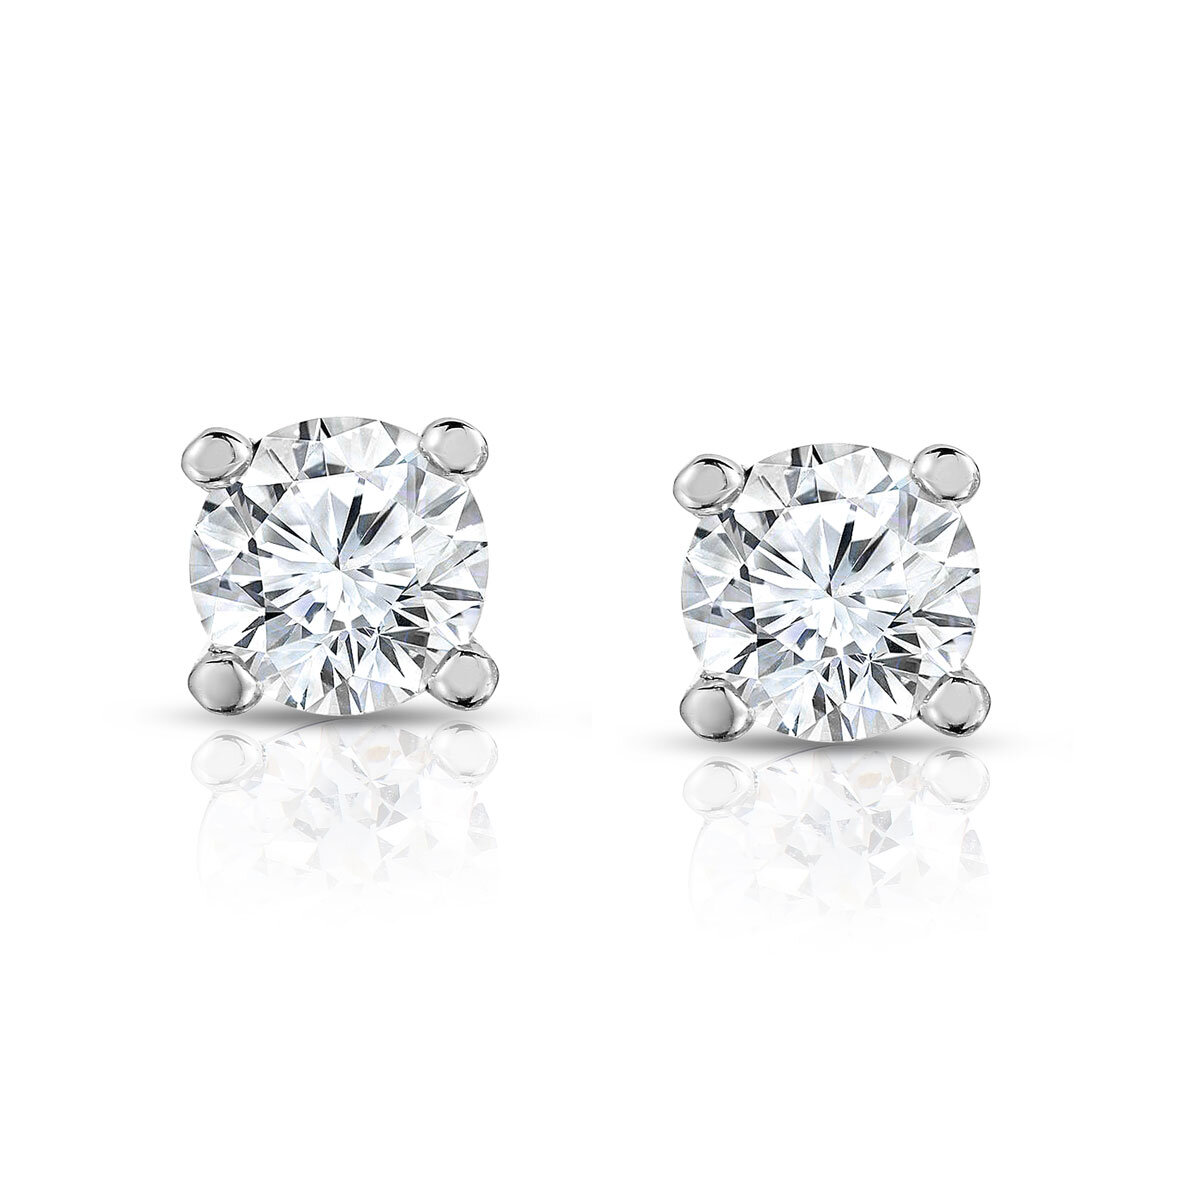 1.00ctw Round Brilliant Cut Diamond Solitaire Stud Earrings, 18ct White Gold